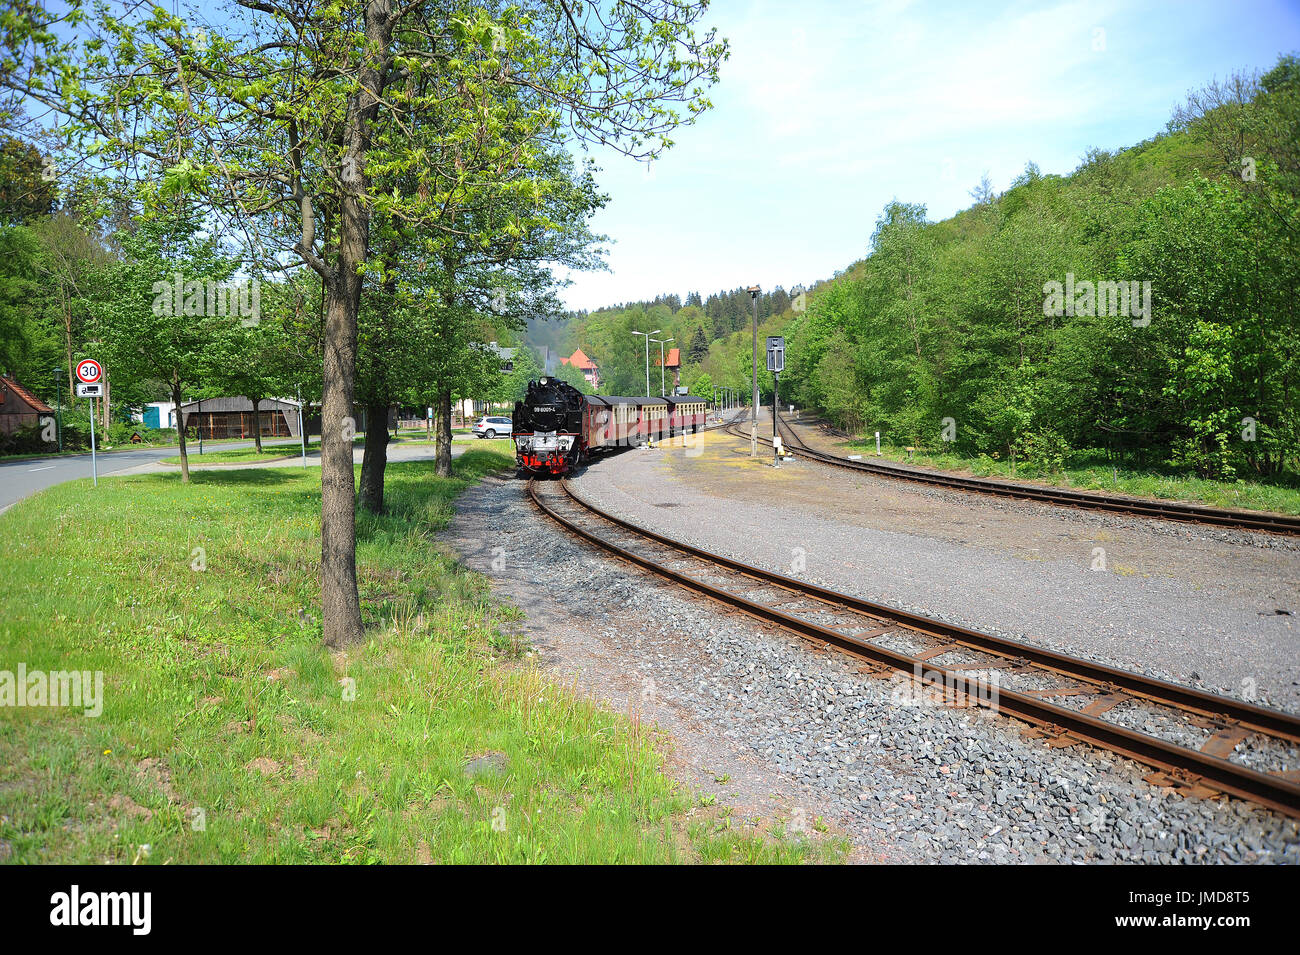 99 6001-4 leaves Alexisbad with the 13:57 Gernrode - Hasselfelde service. Stock Photo